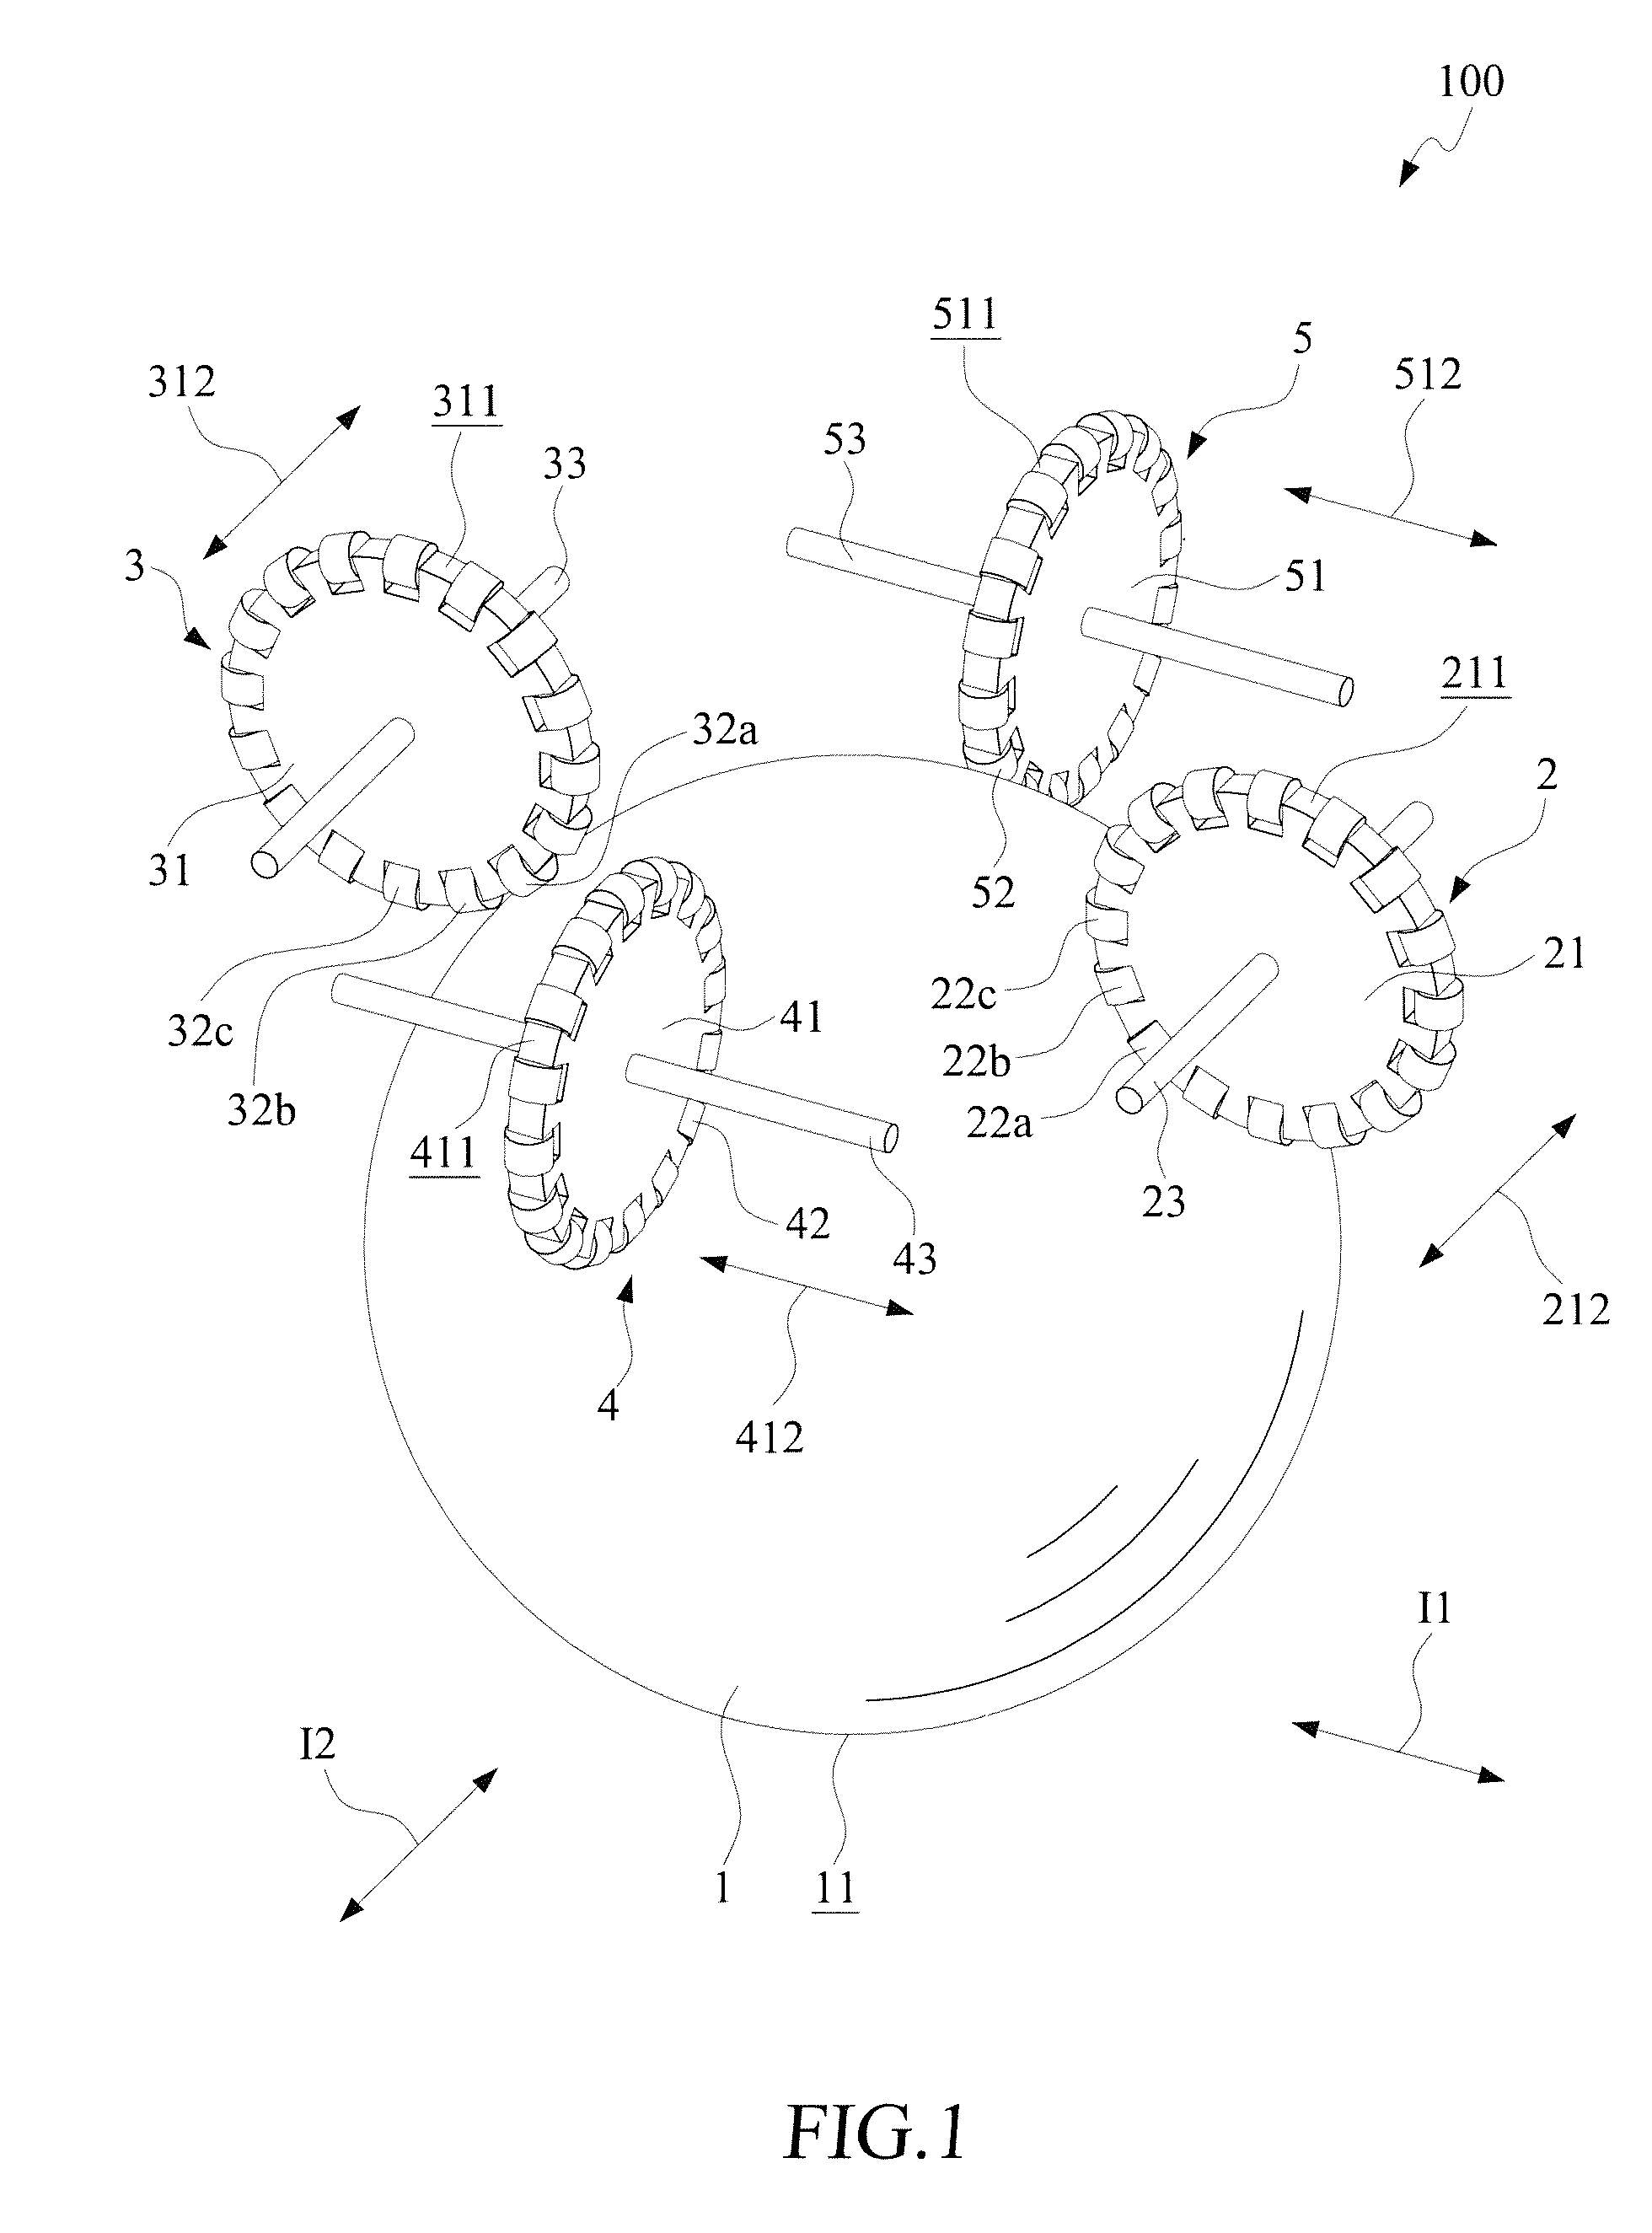 Omni-wheel based driving device with enhanced main wheel structure